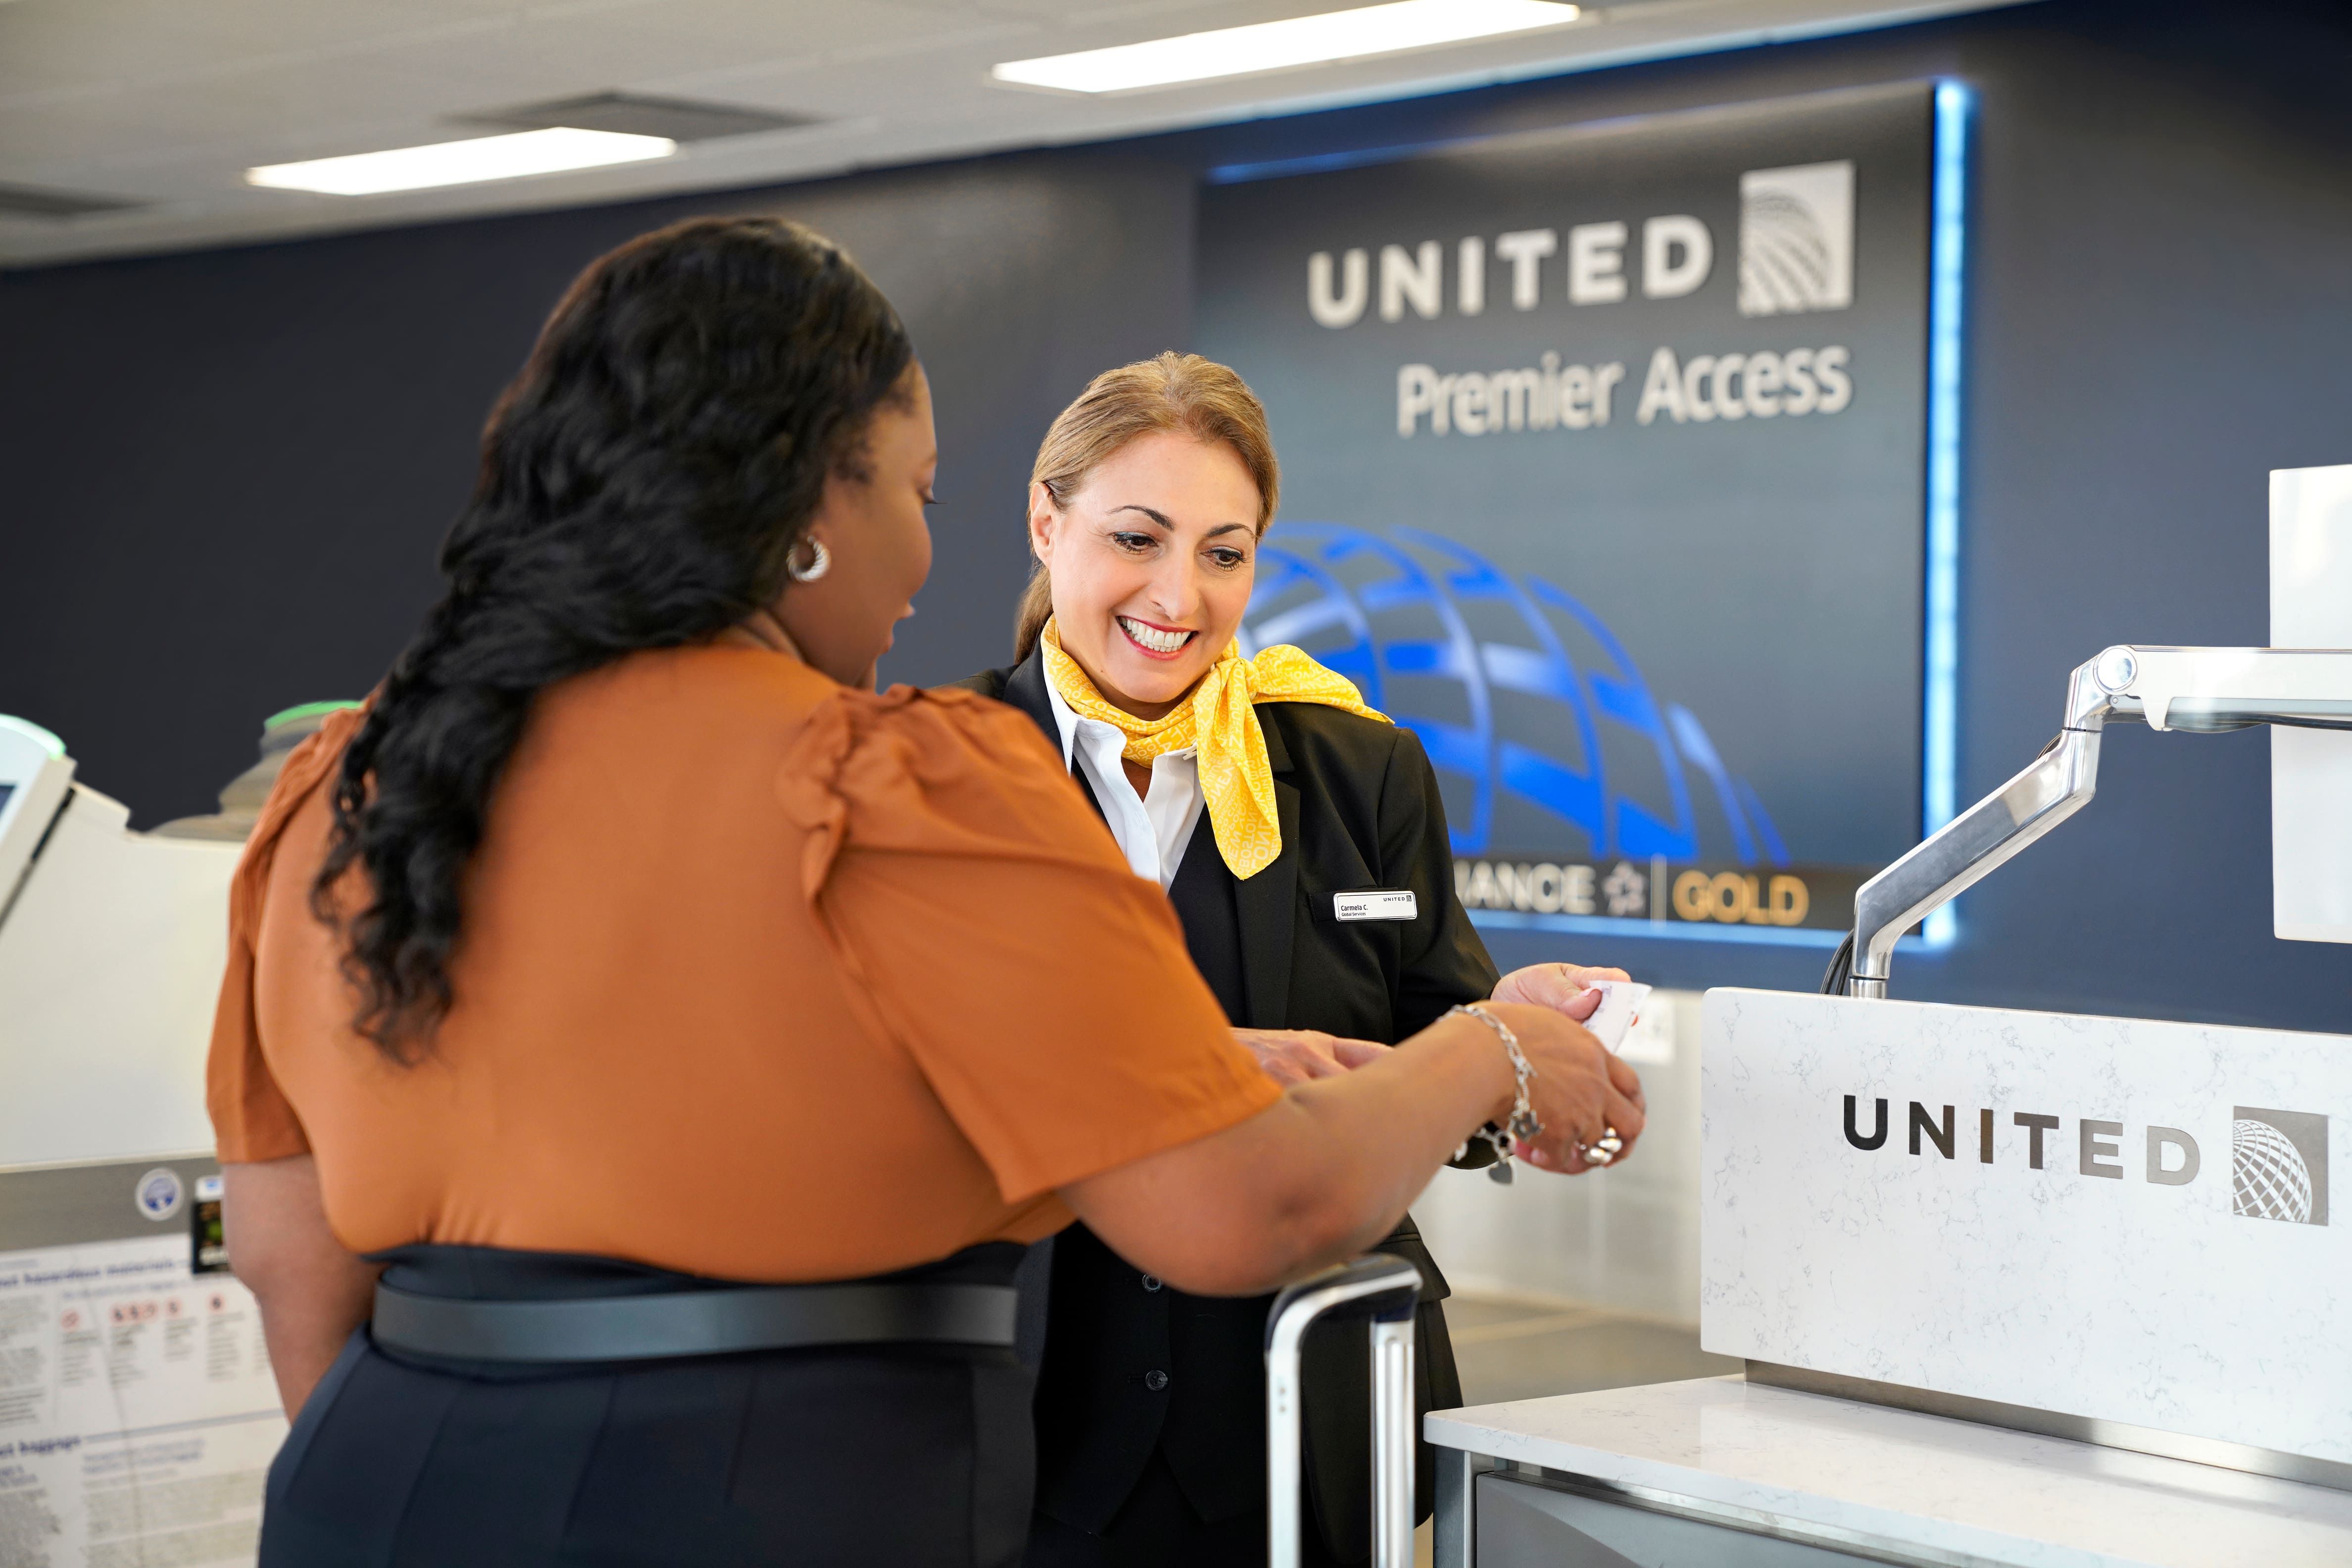 A woman checking in at the United Airlines Premier Access counter